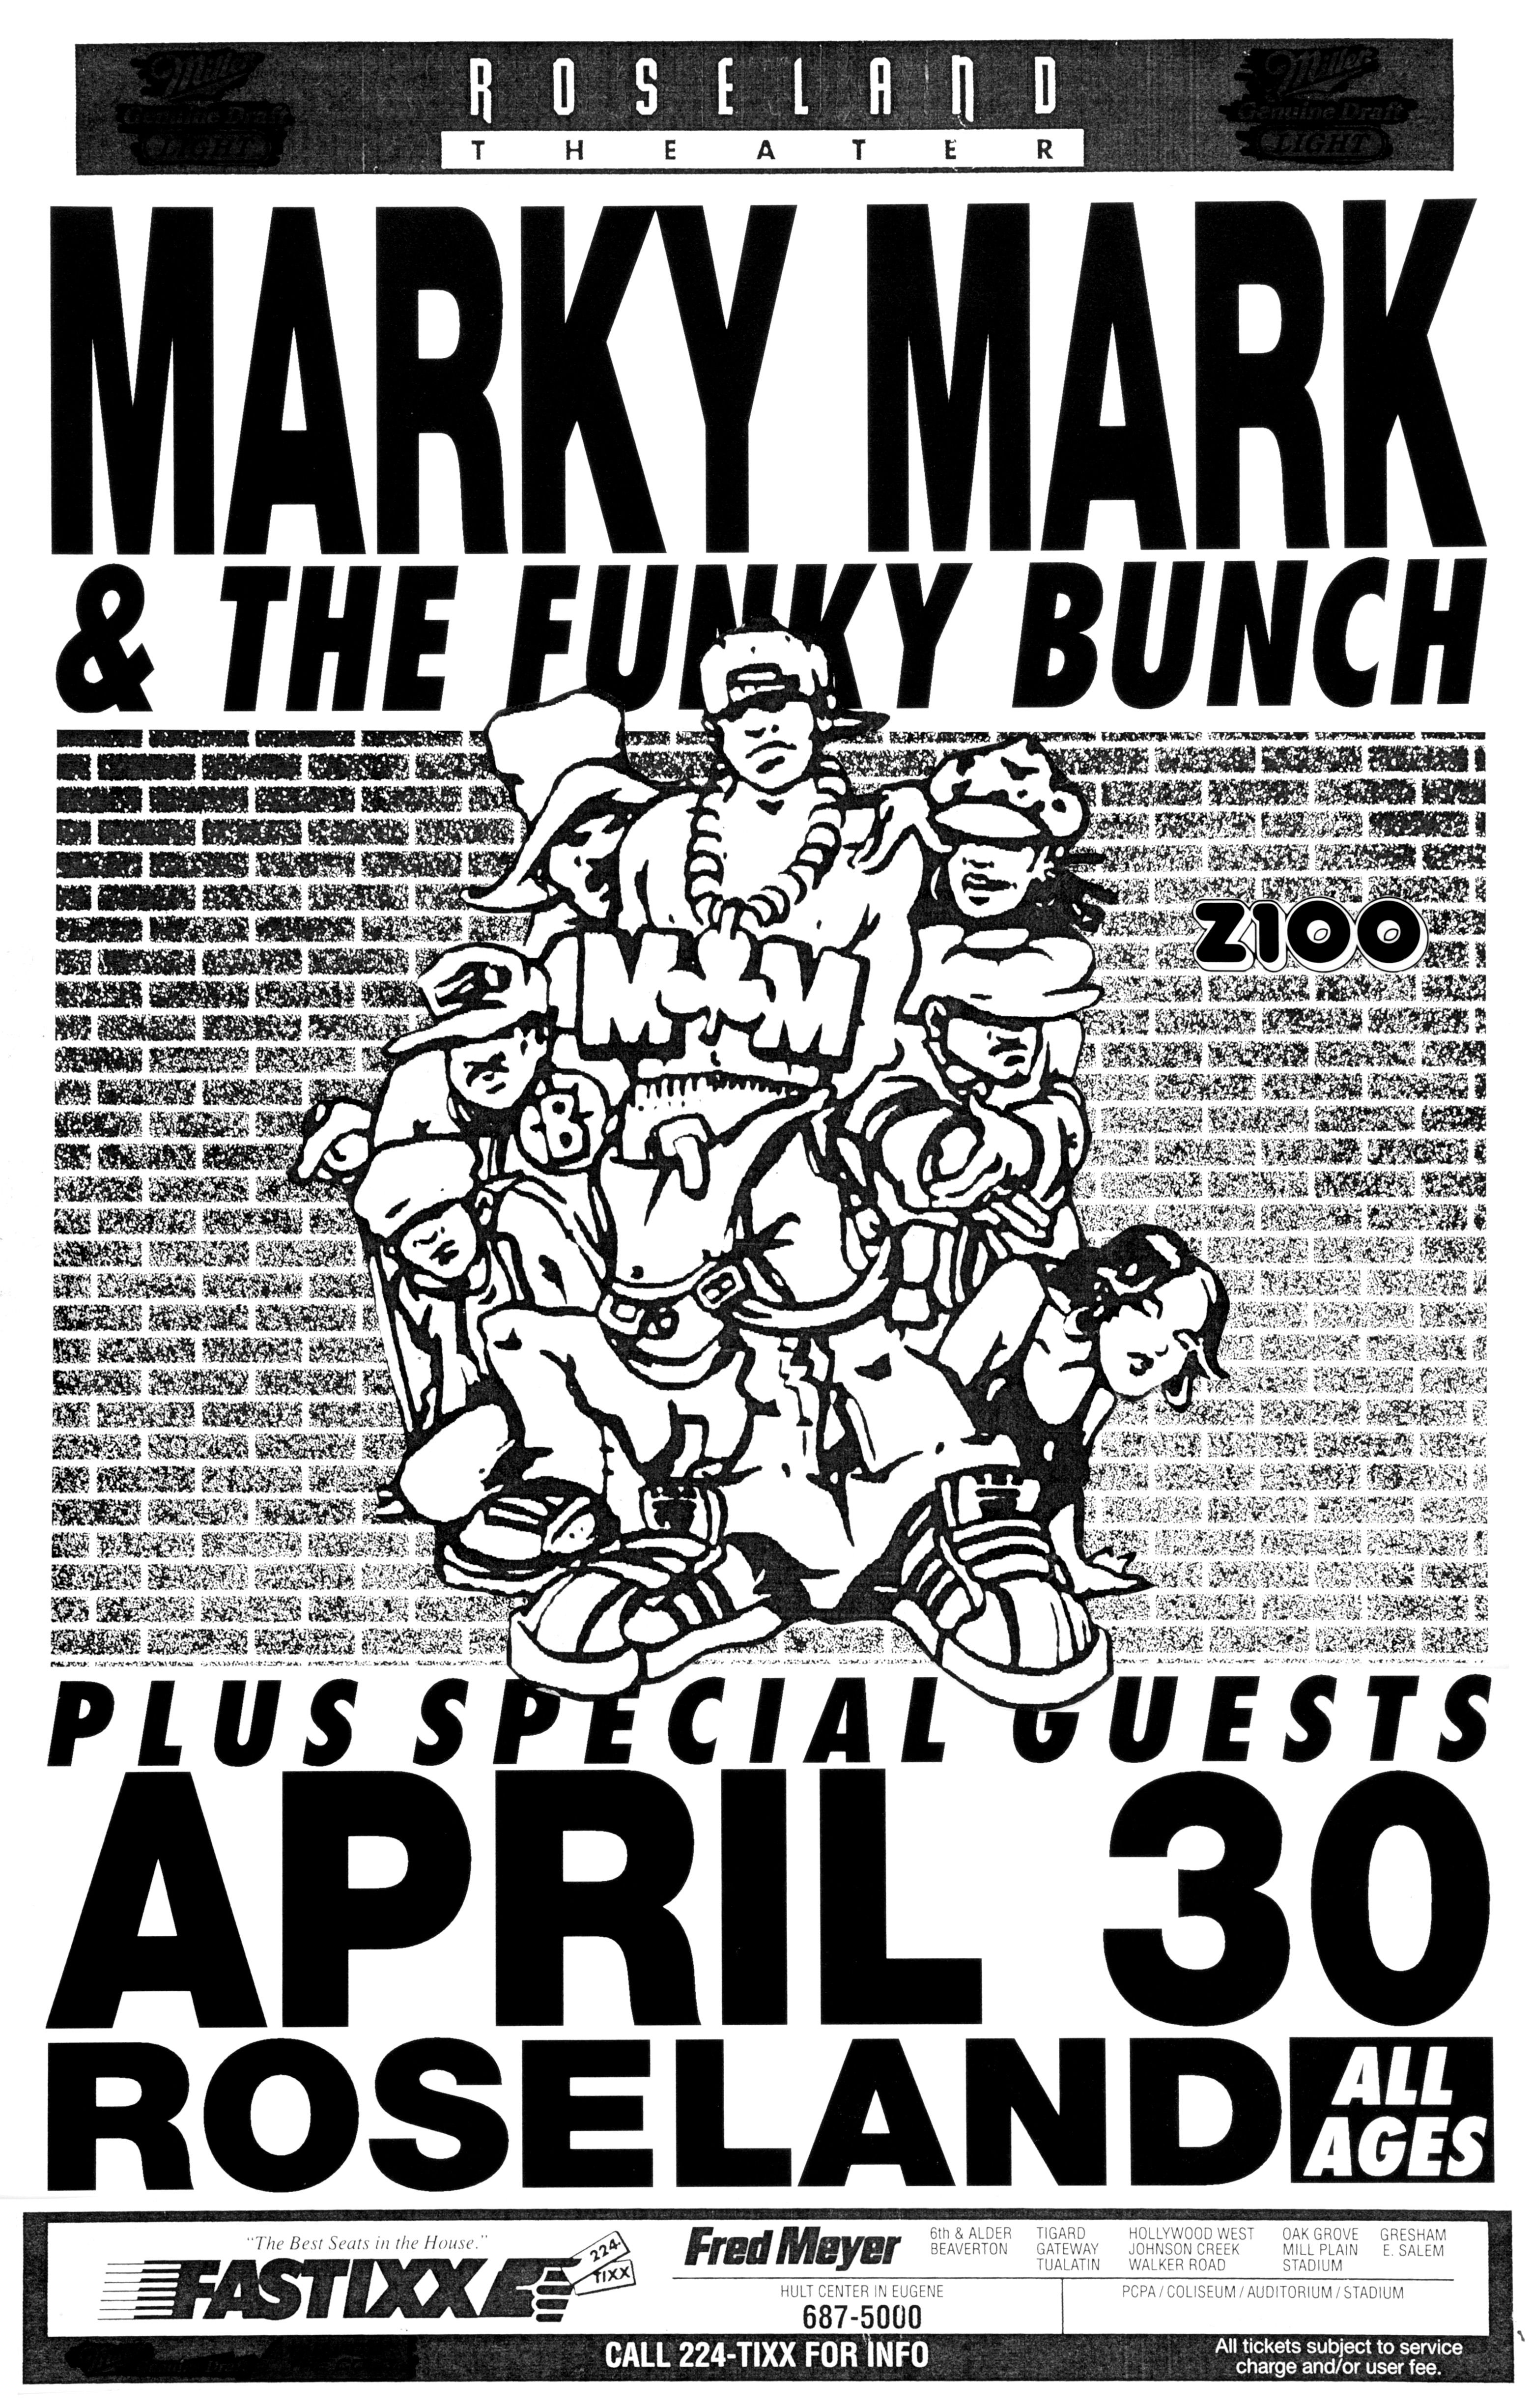 MXP-142.24 Marky Mark & The Funky Bunch 1992 Roseland Theater  Apr 30 Concert Poster